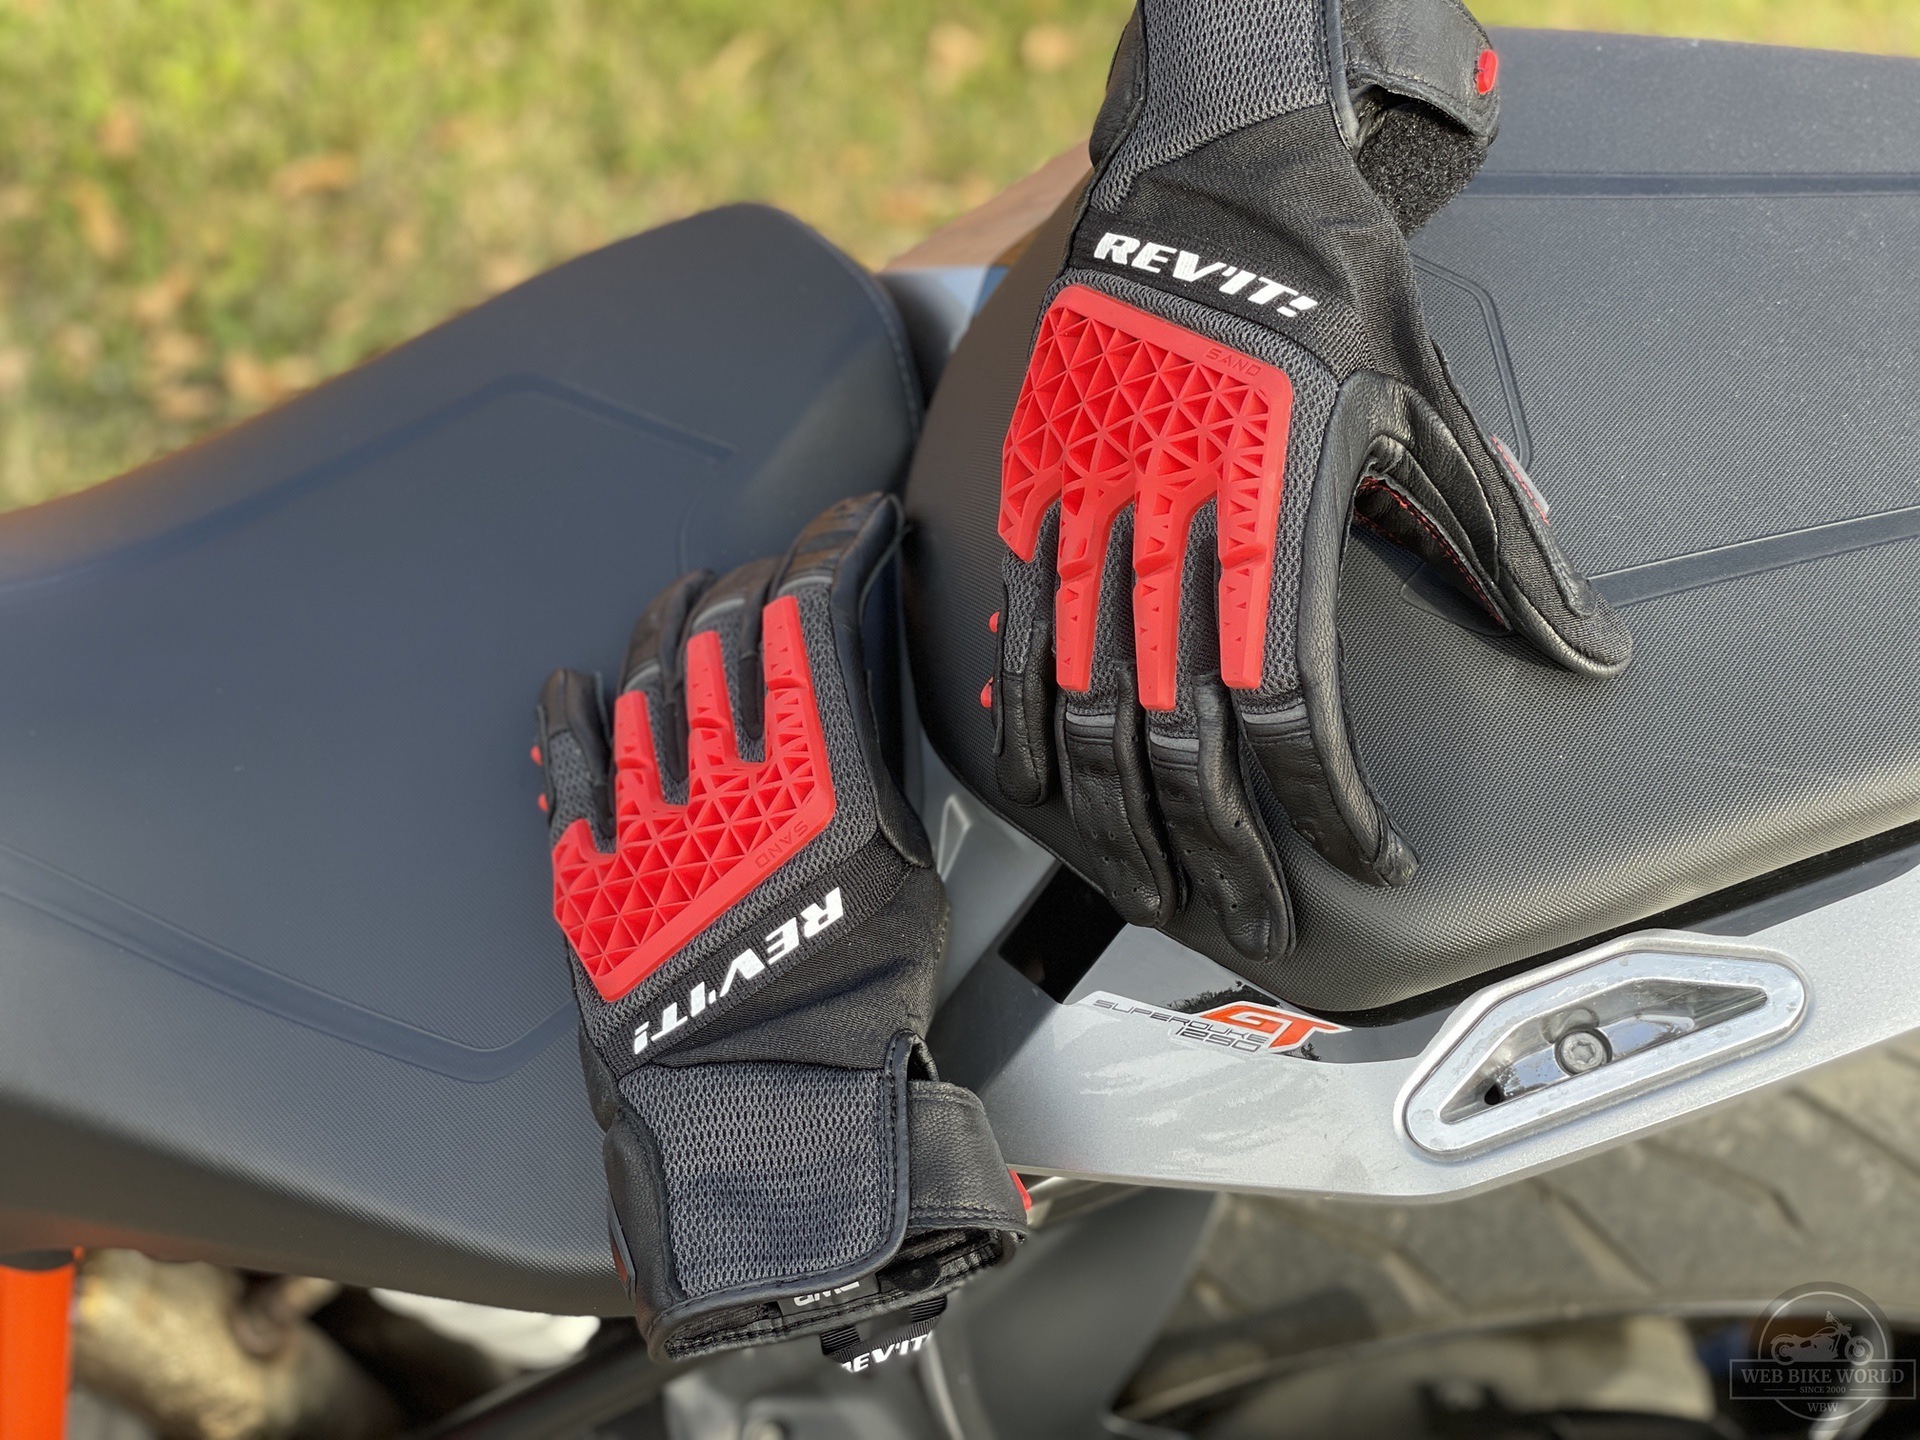 REV'IT Sand 4 Gloves in black and red lying on seat of motorcycle